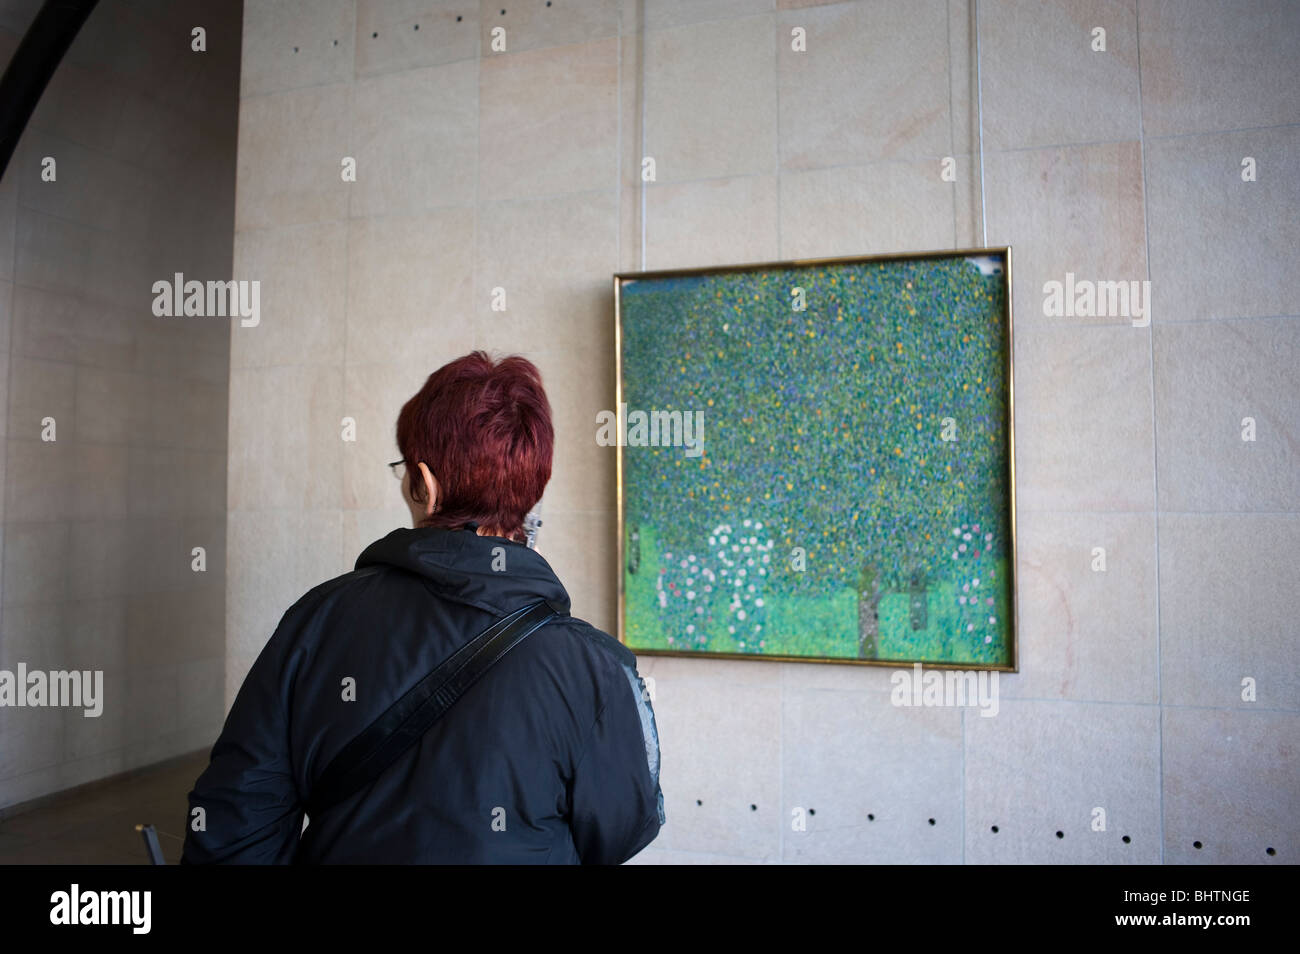 Paris, France - Woman Looking at Symbolist Post Impressionist Painting on Display in Inside of Orsay Museum, fine art Stock Photo